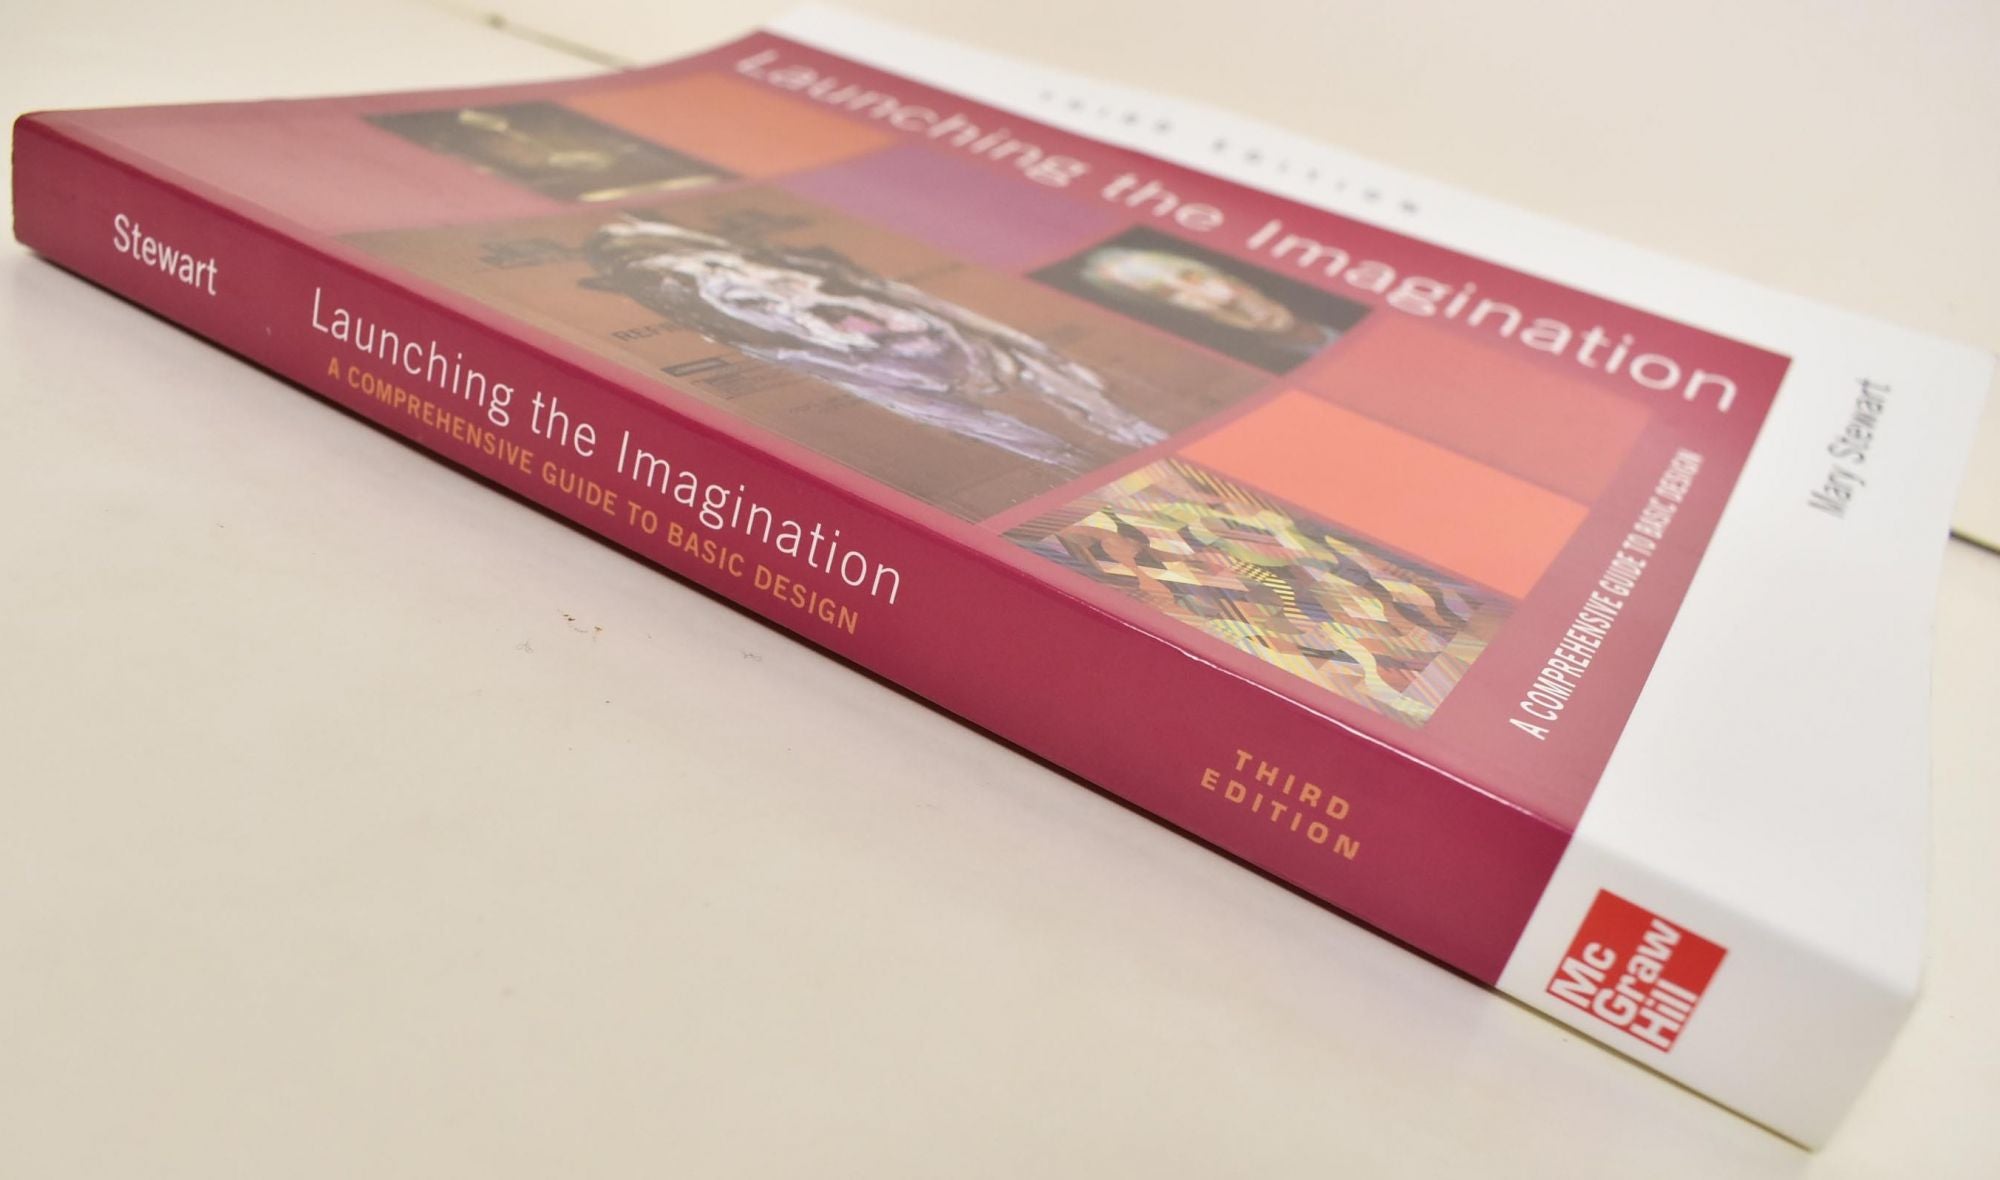 Launching The Imagination: A Comprehensive Guide To Basic Design